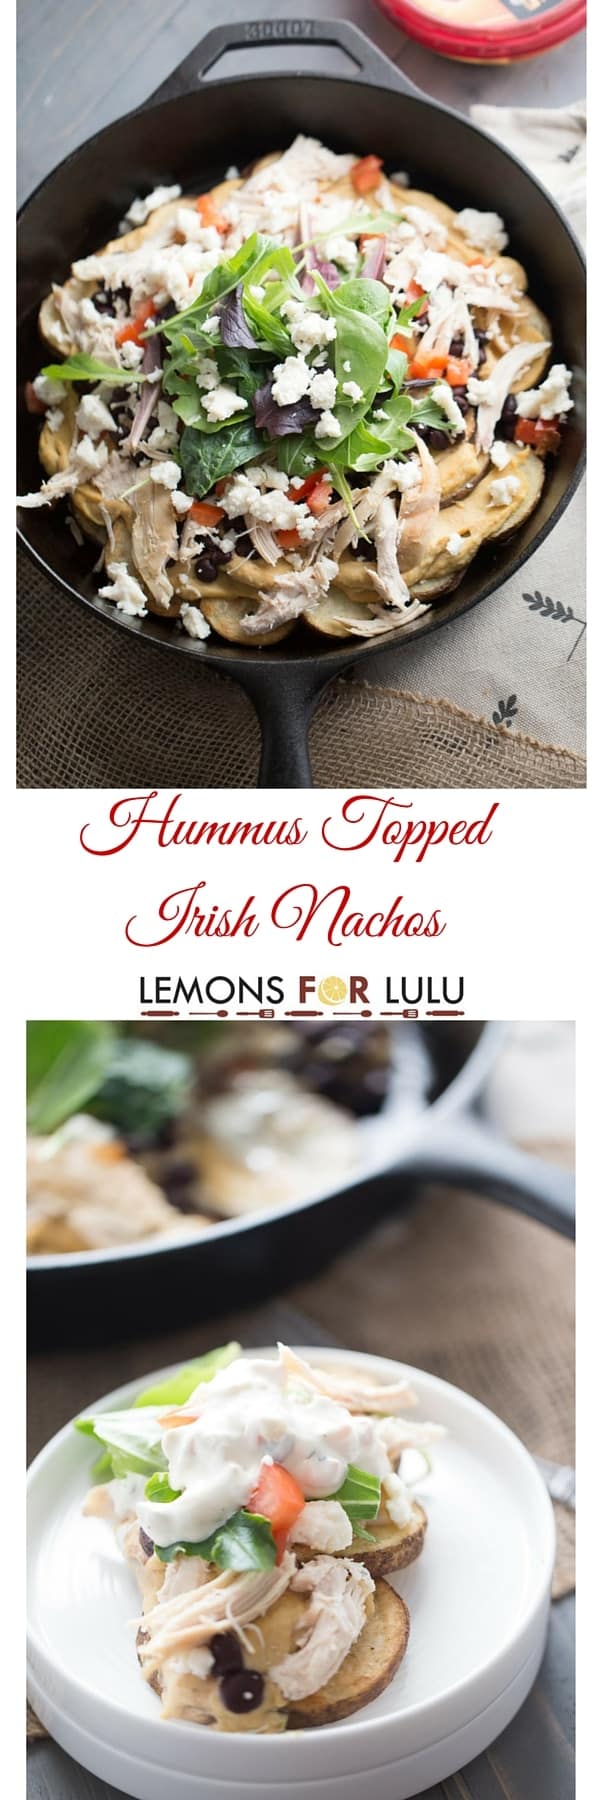 Crispy baked potatoes give this game day snack and Irish twist, but the hummus, chicken and veggies turns this easy snack into something extraordinary! lemonsforlulu.com